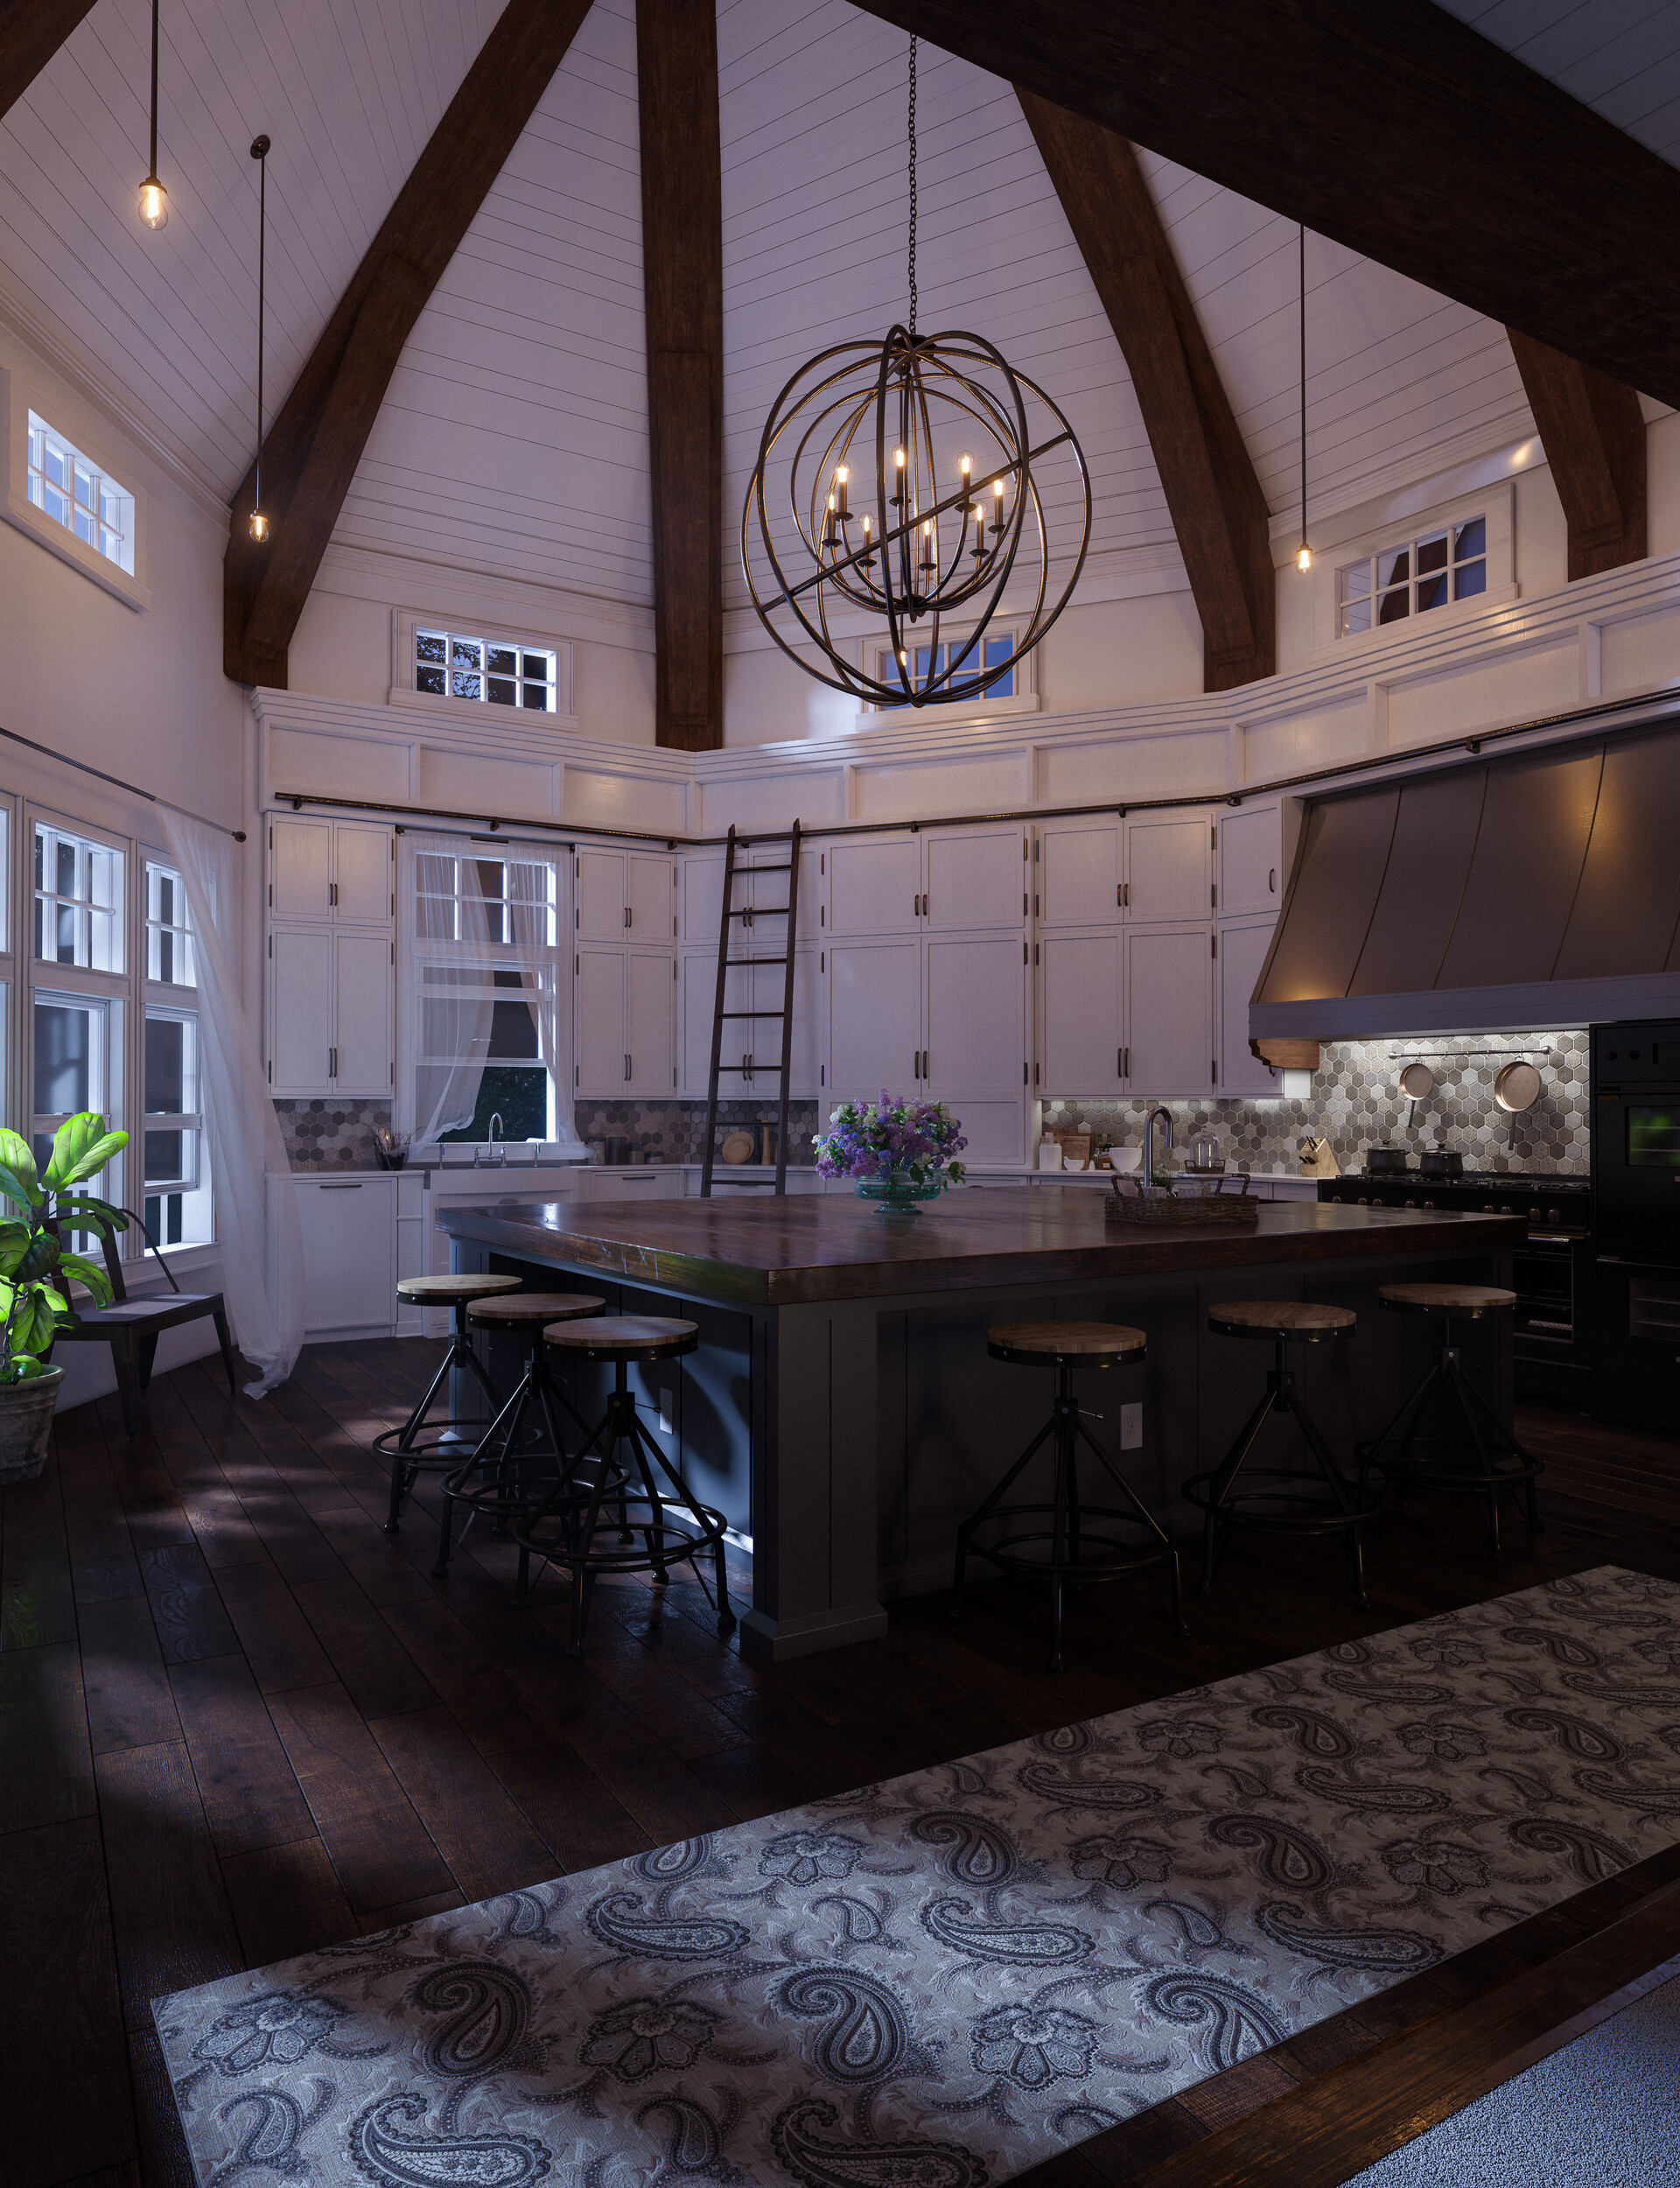 Spencer Fitch Rustic Lake House Kitchen